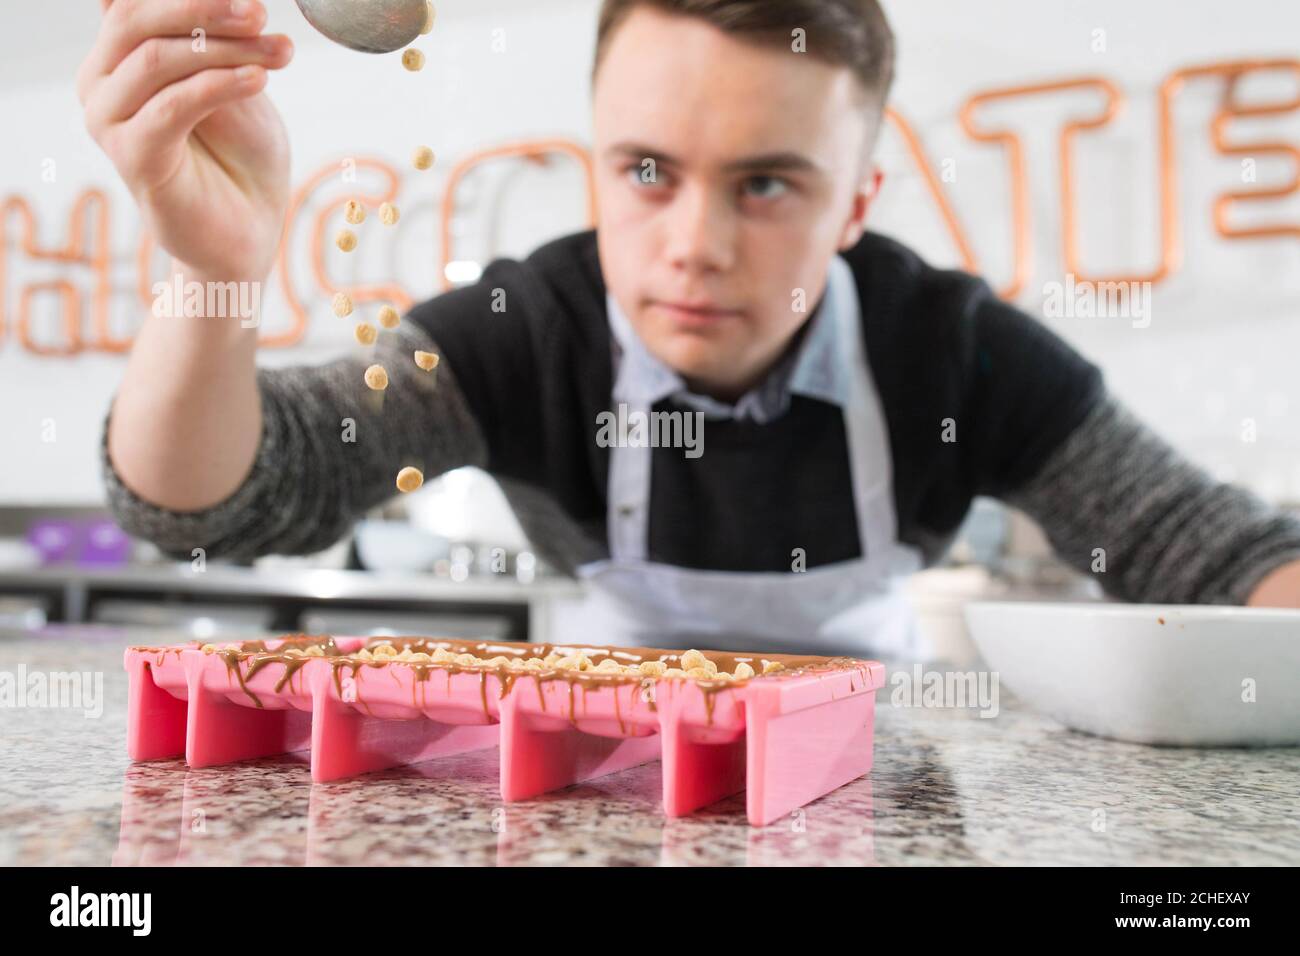 EDITORIAL USE ONLY Callum Clogher, a 17-year-old from Roscommon in Ireland, visits the Cadbury Innovation Kitchen in Bournville, Birmingham, to create his CHOCA-LATTE bar after winning the Cadbury Inventor competition to become one of three winning inventors chosen from the public. Stock Photo